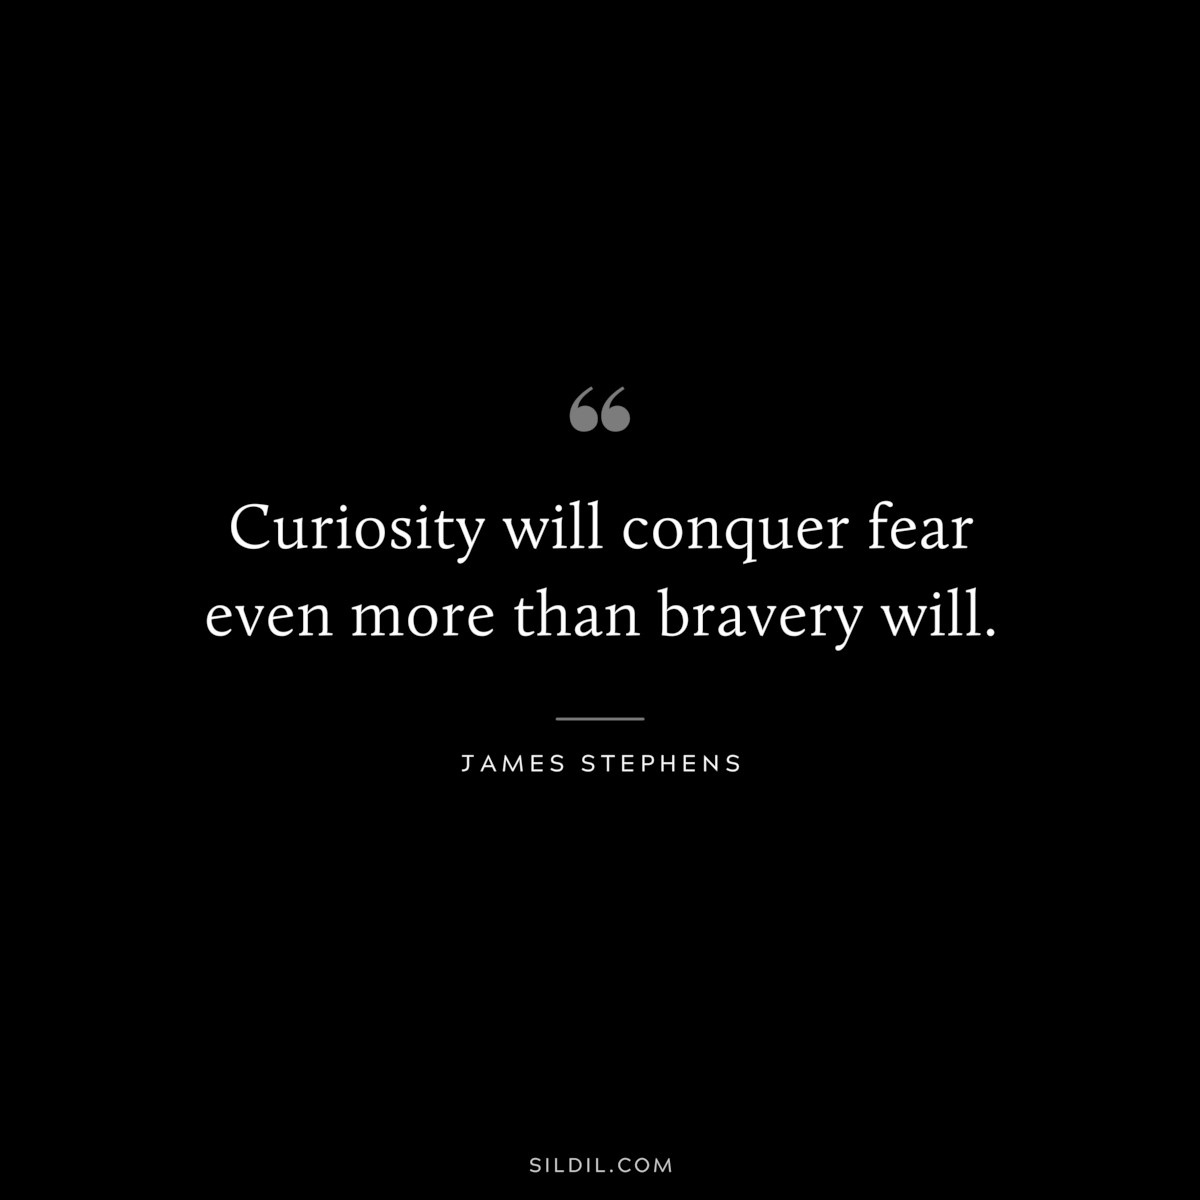 Curiosity will conquer fear even more than bravery will. ― James Stephens